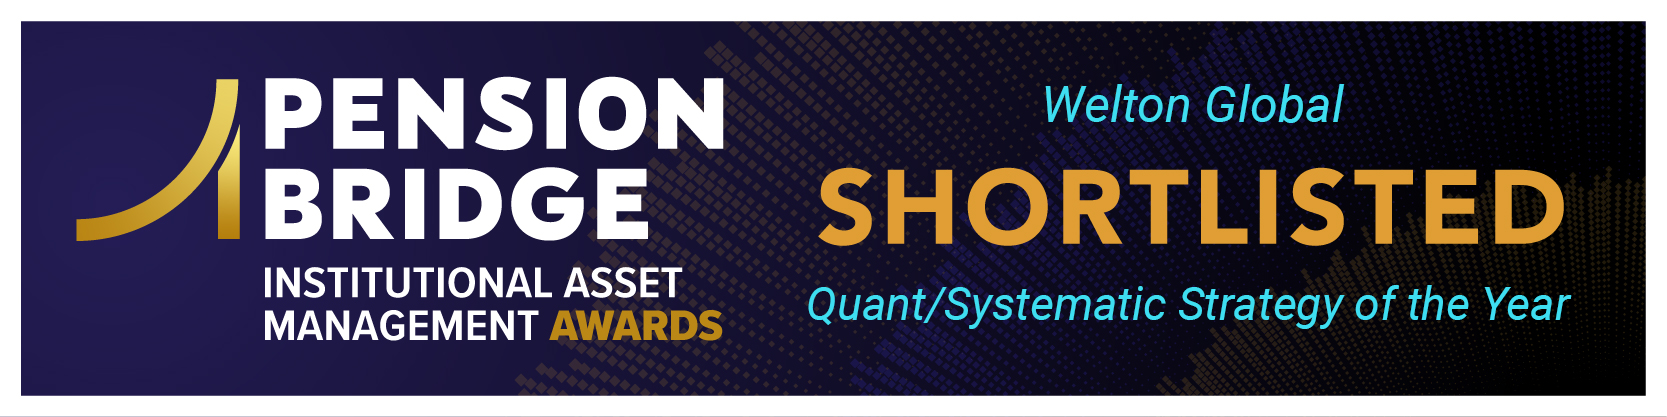 Welton Global Shortlisted for “Quant/Systematic Strategy of the Year”